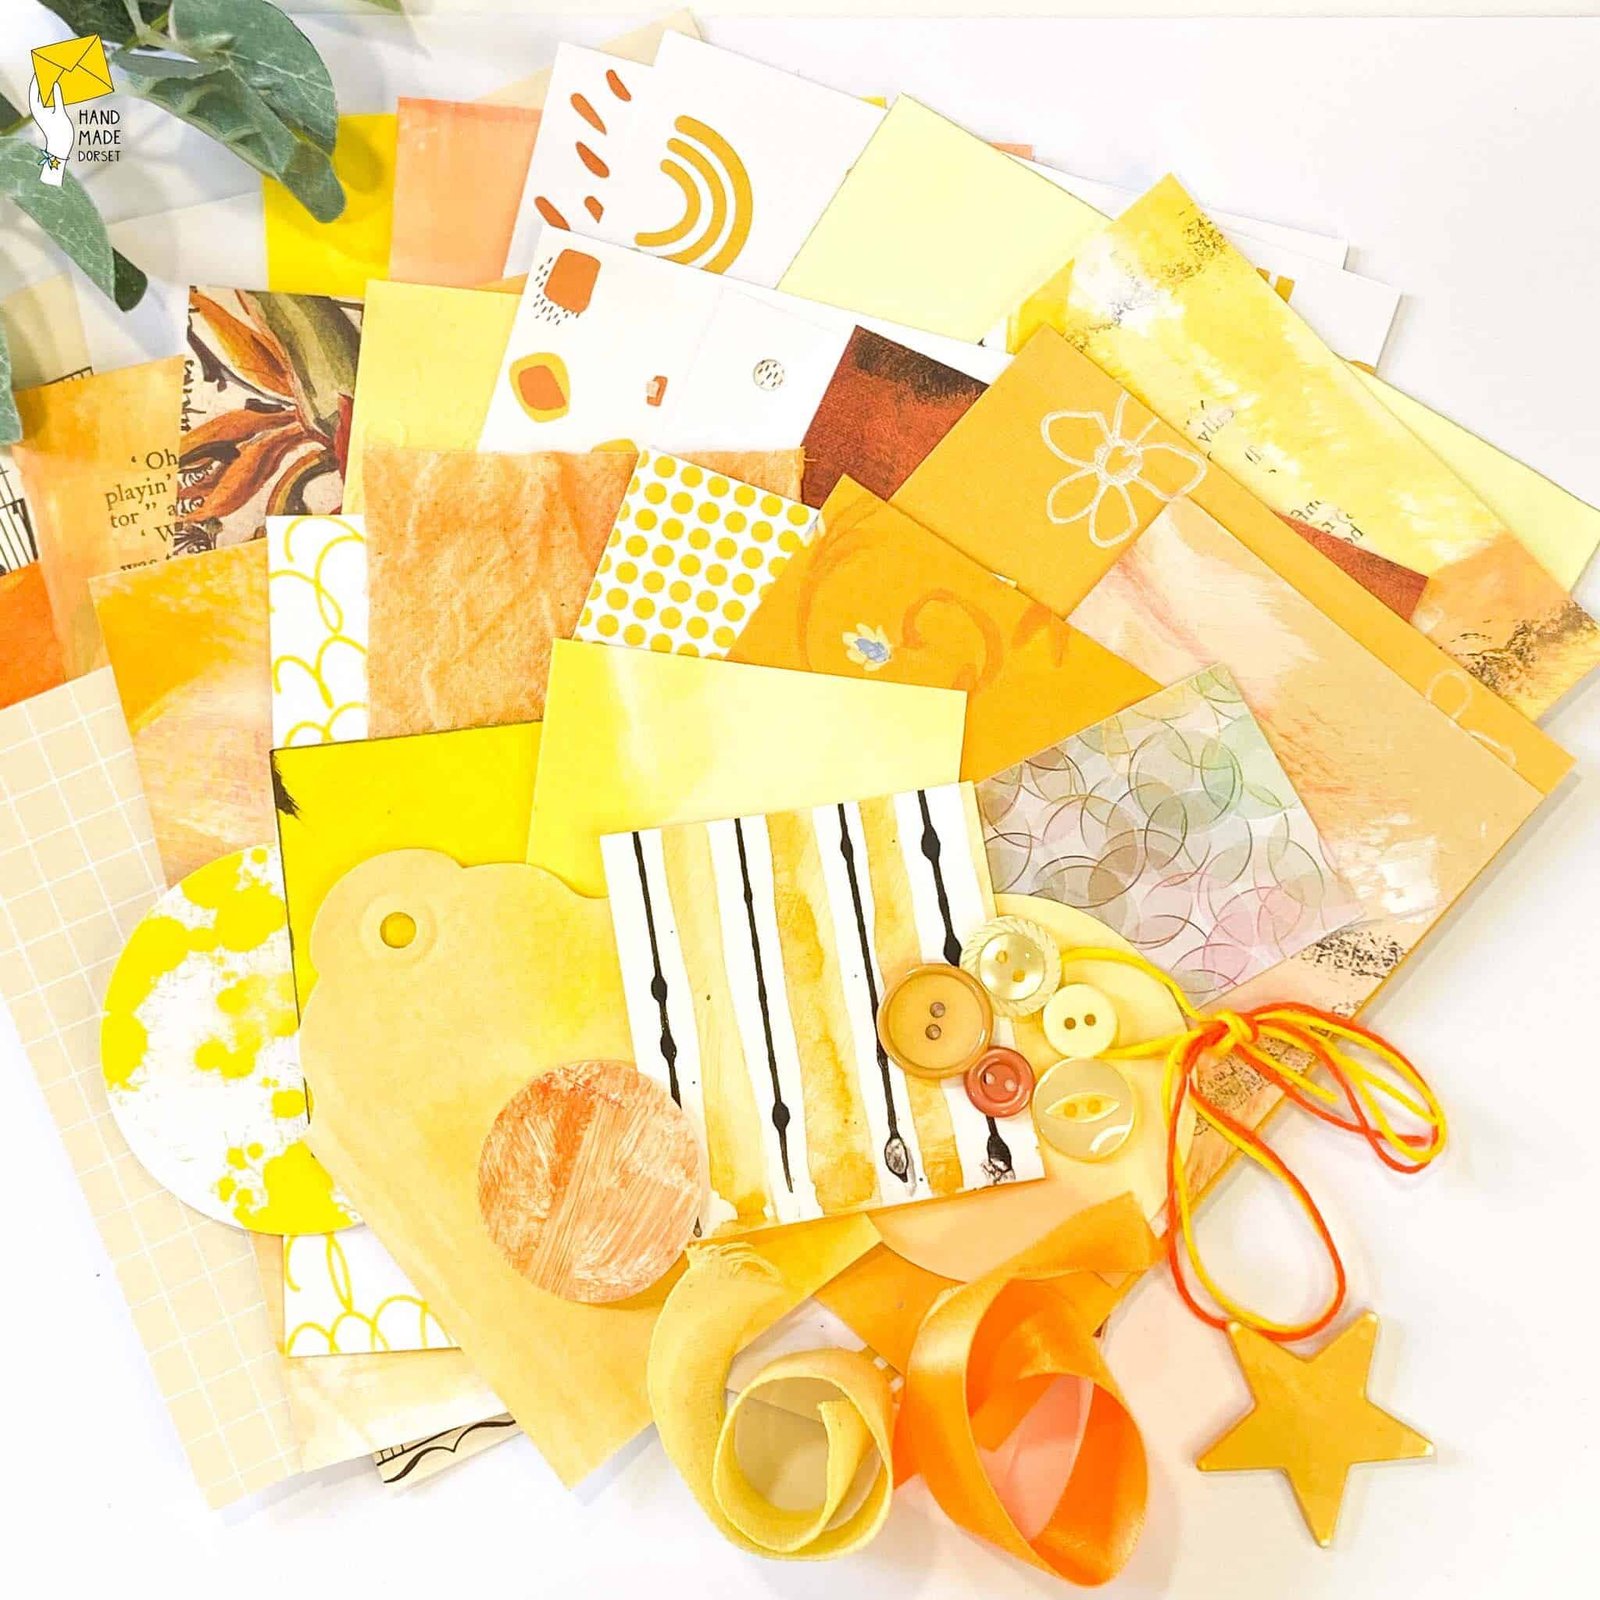 Colour Scrap Packs - a special selection of hand picked papers & more